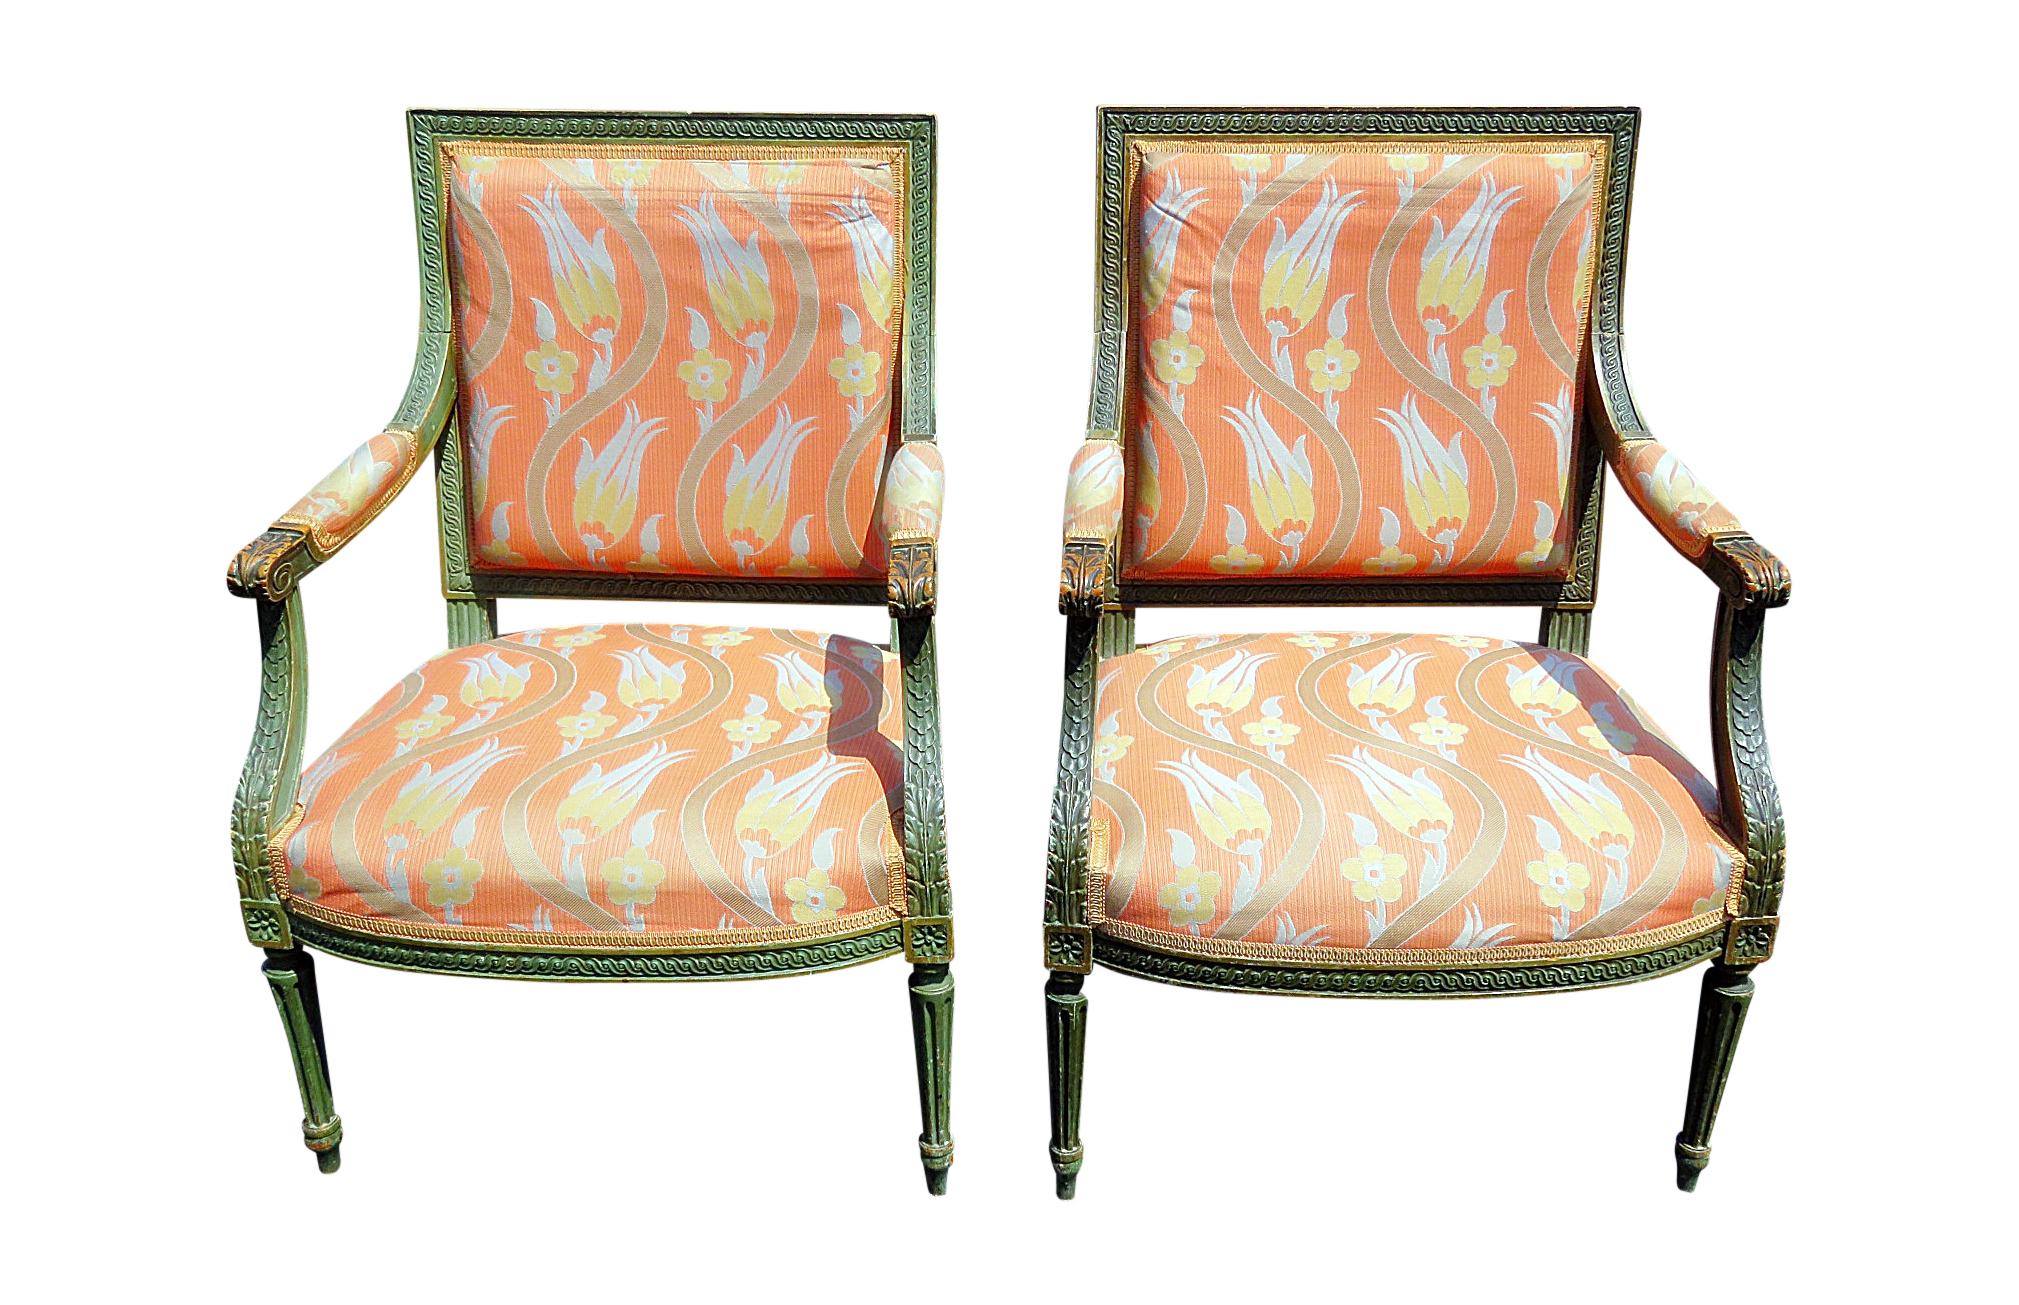 Pair of Louis XVI style distressed painted armchairs.